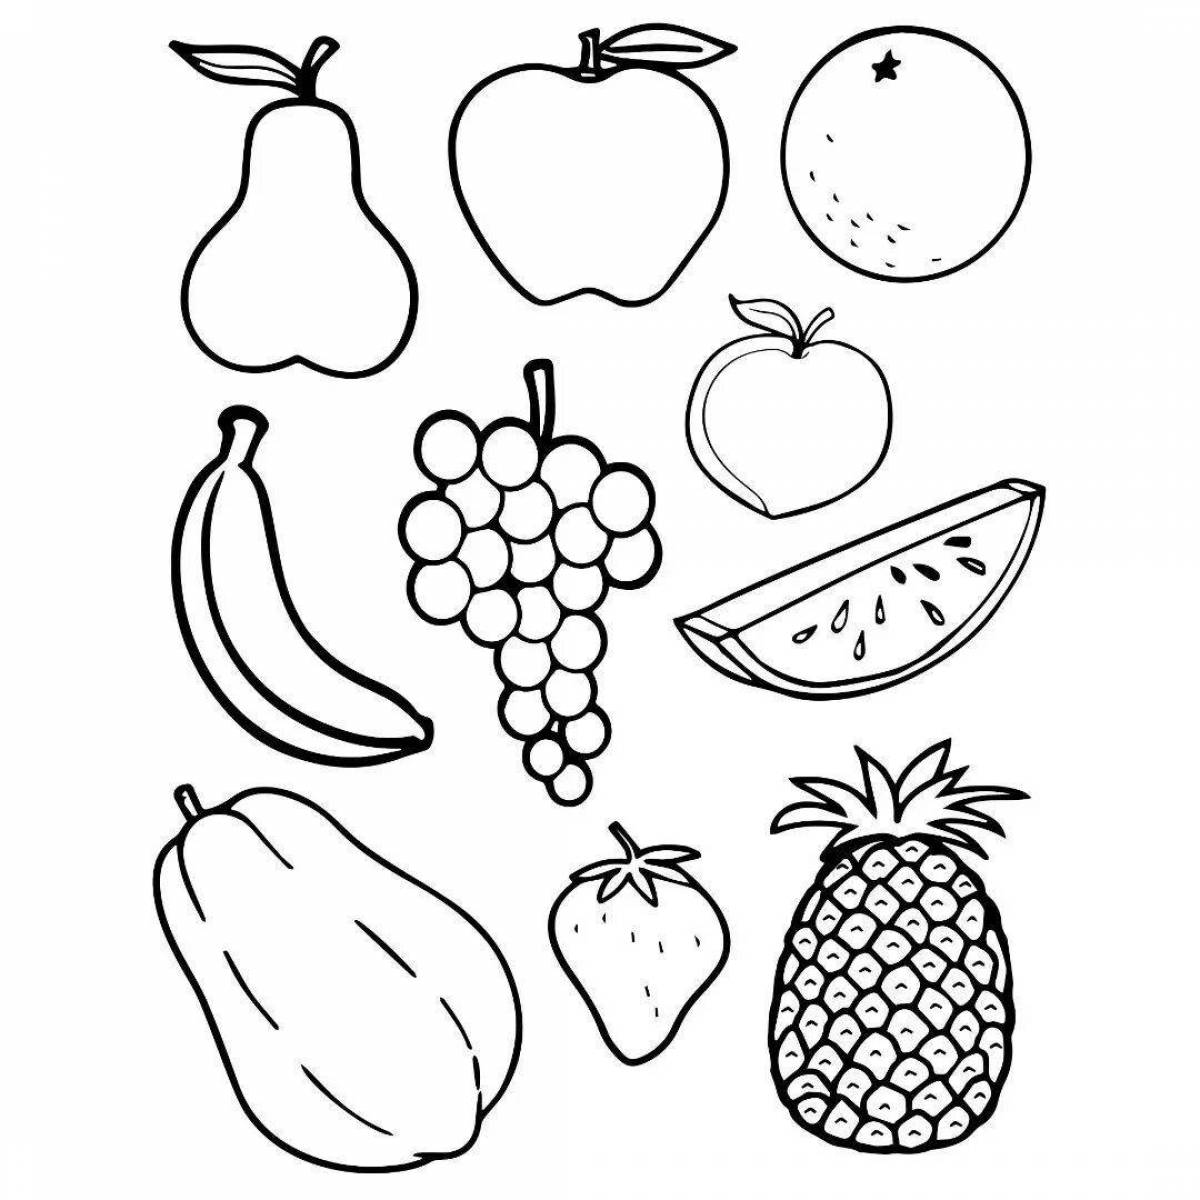 Fresh fruits coloring page